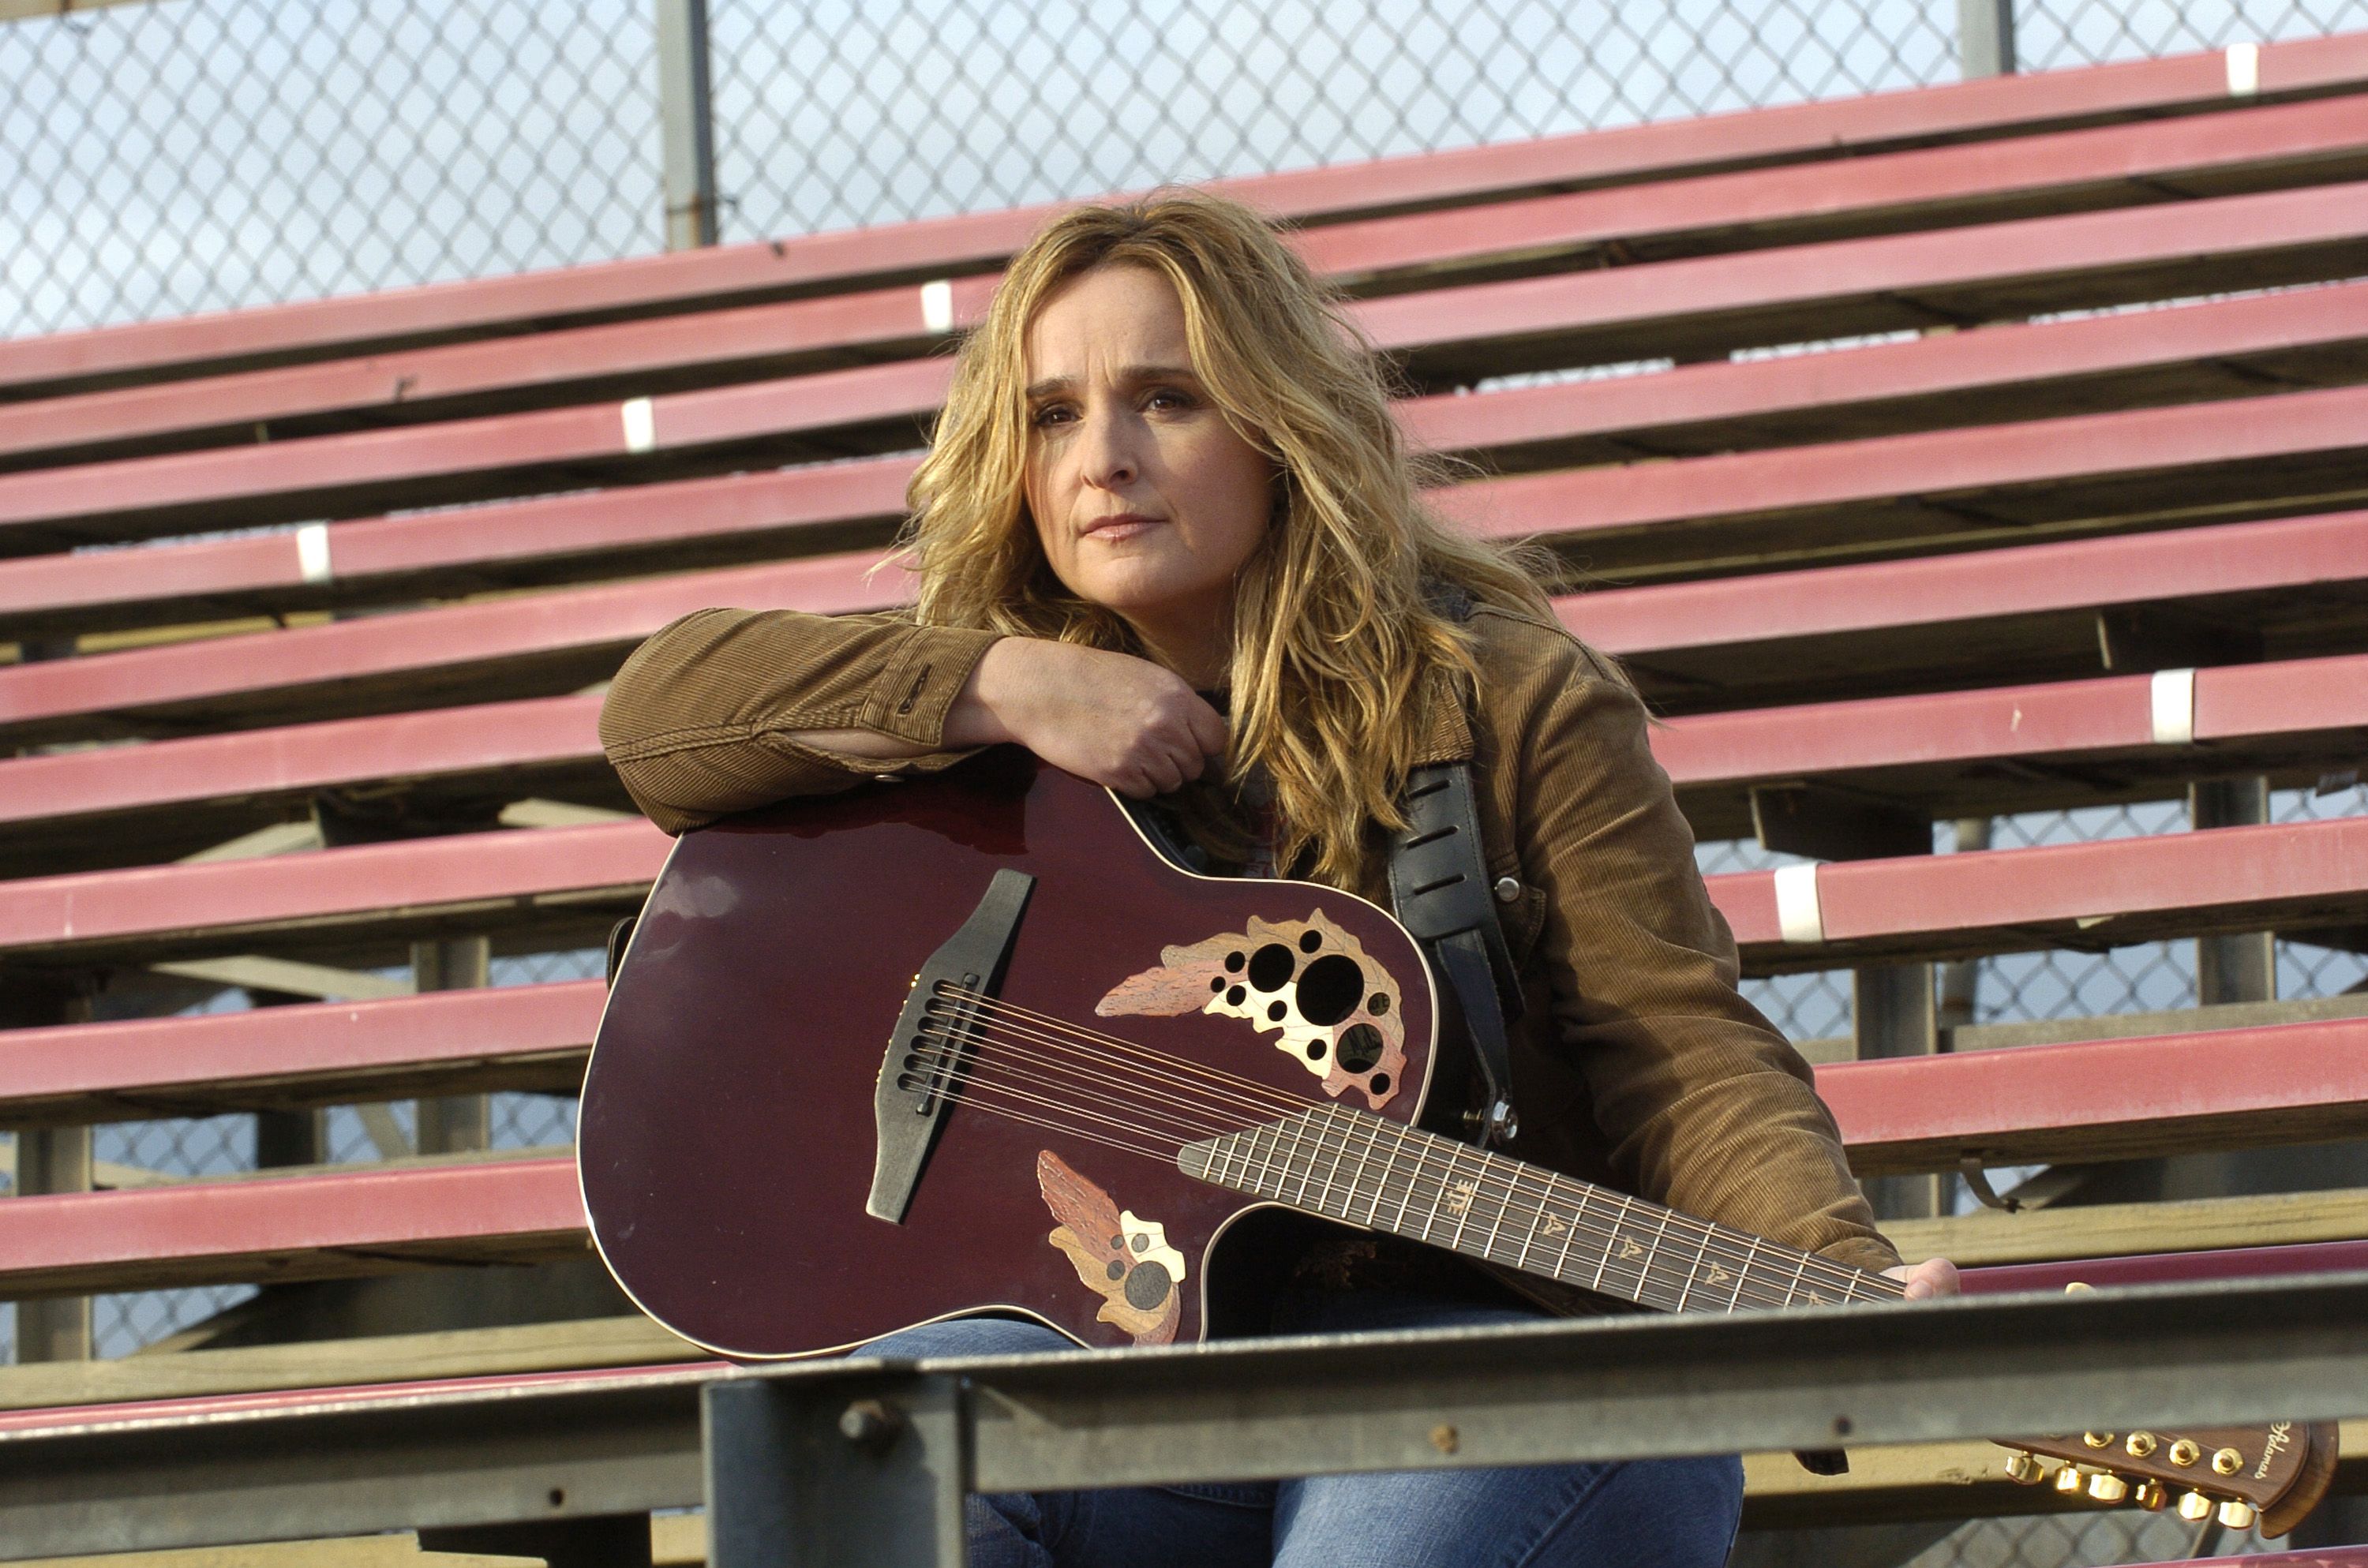 Still images from Melissa Etheridge's music video for her single "Breathe" on December 10, 2003 | Photo: Getty Images